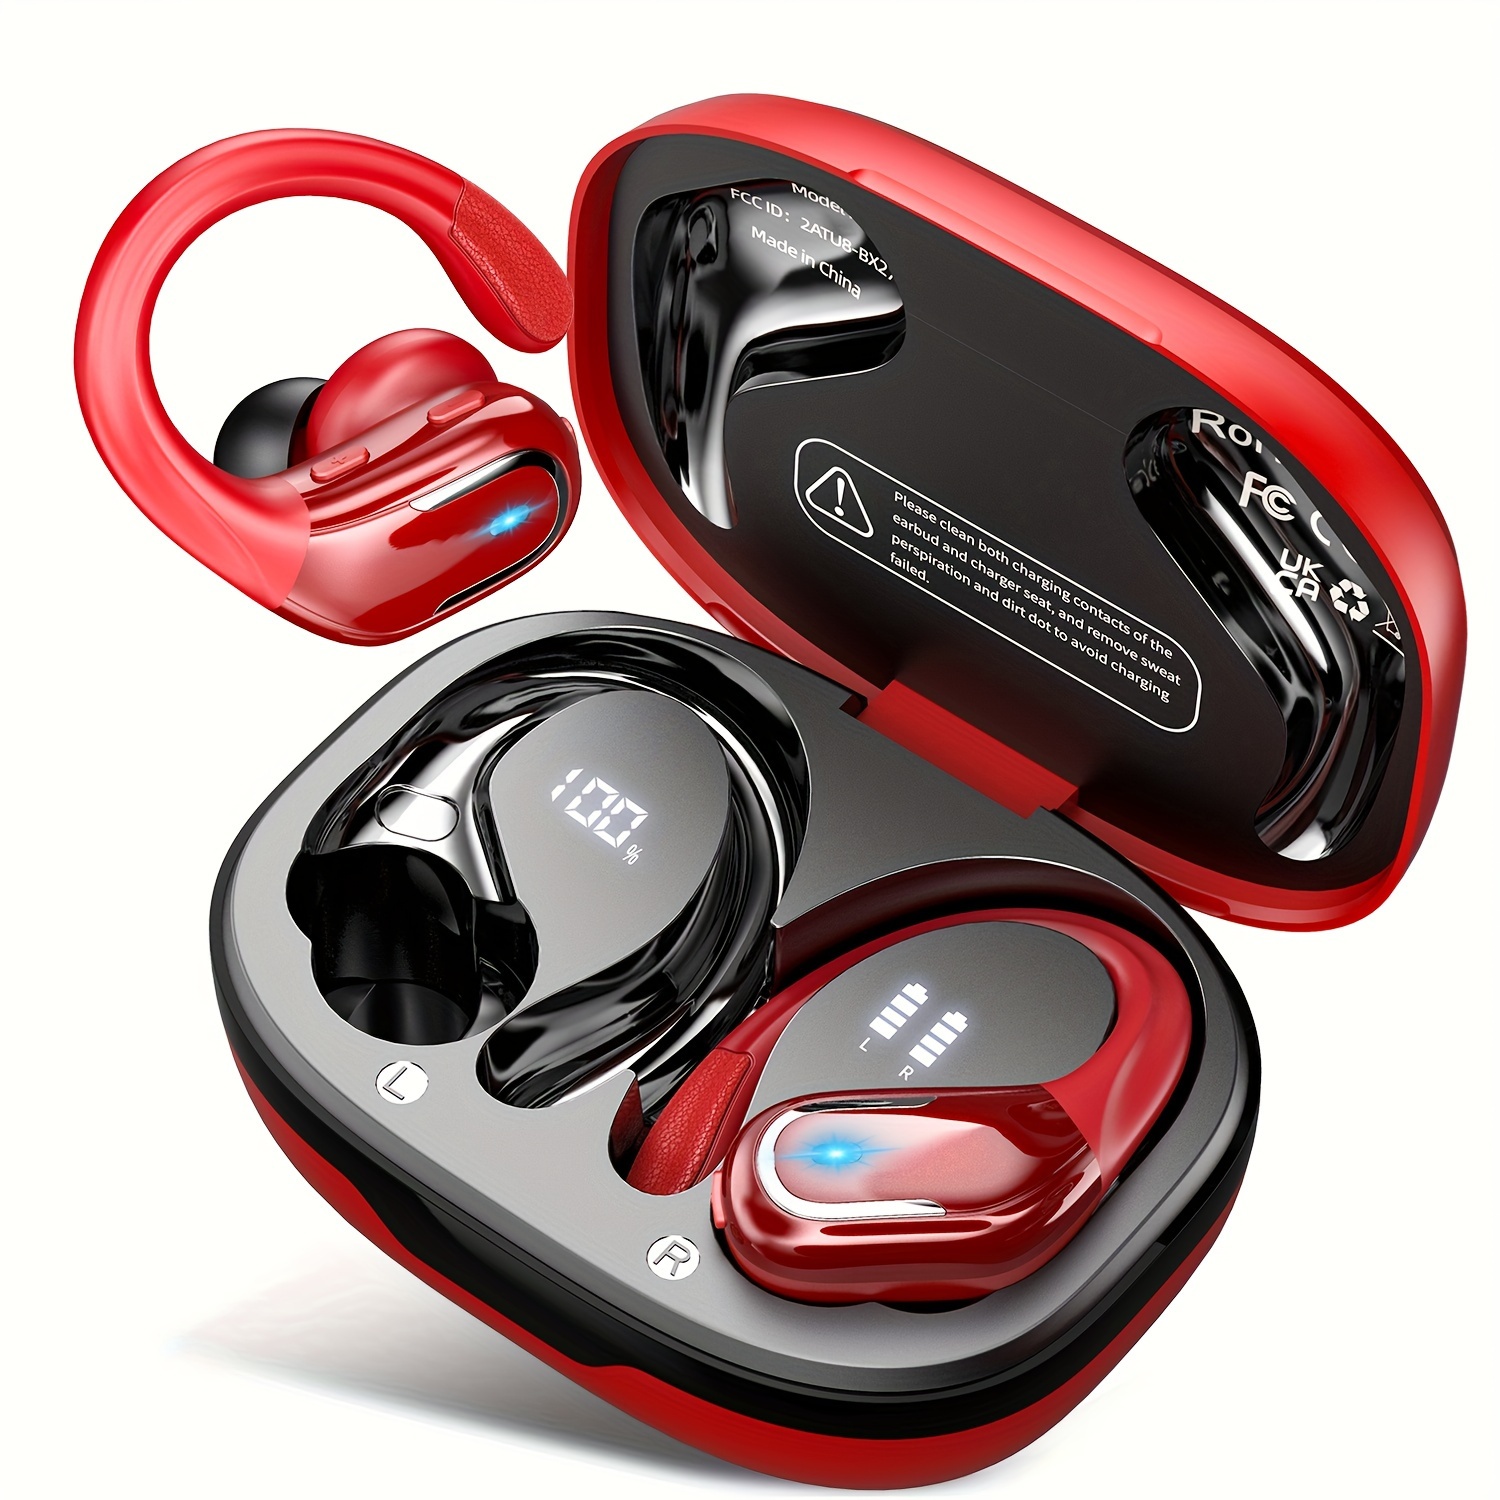 

Premium Tws Sports Headphones - Wireless Earbuds With Ipx7 Waterproof & Microphone For Iphone & Android